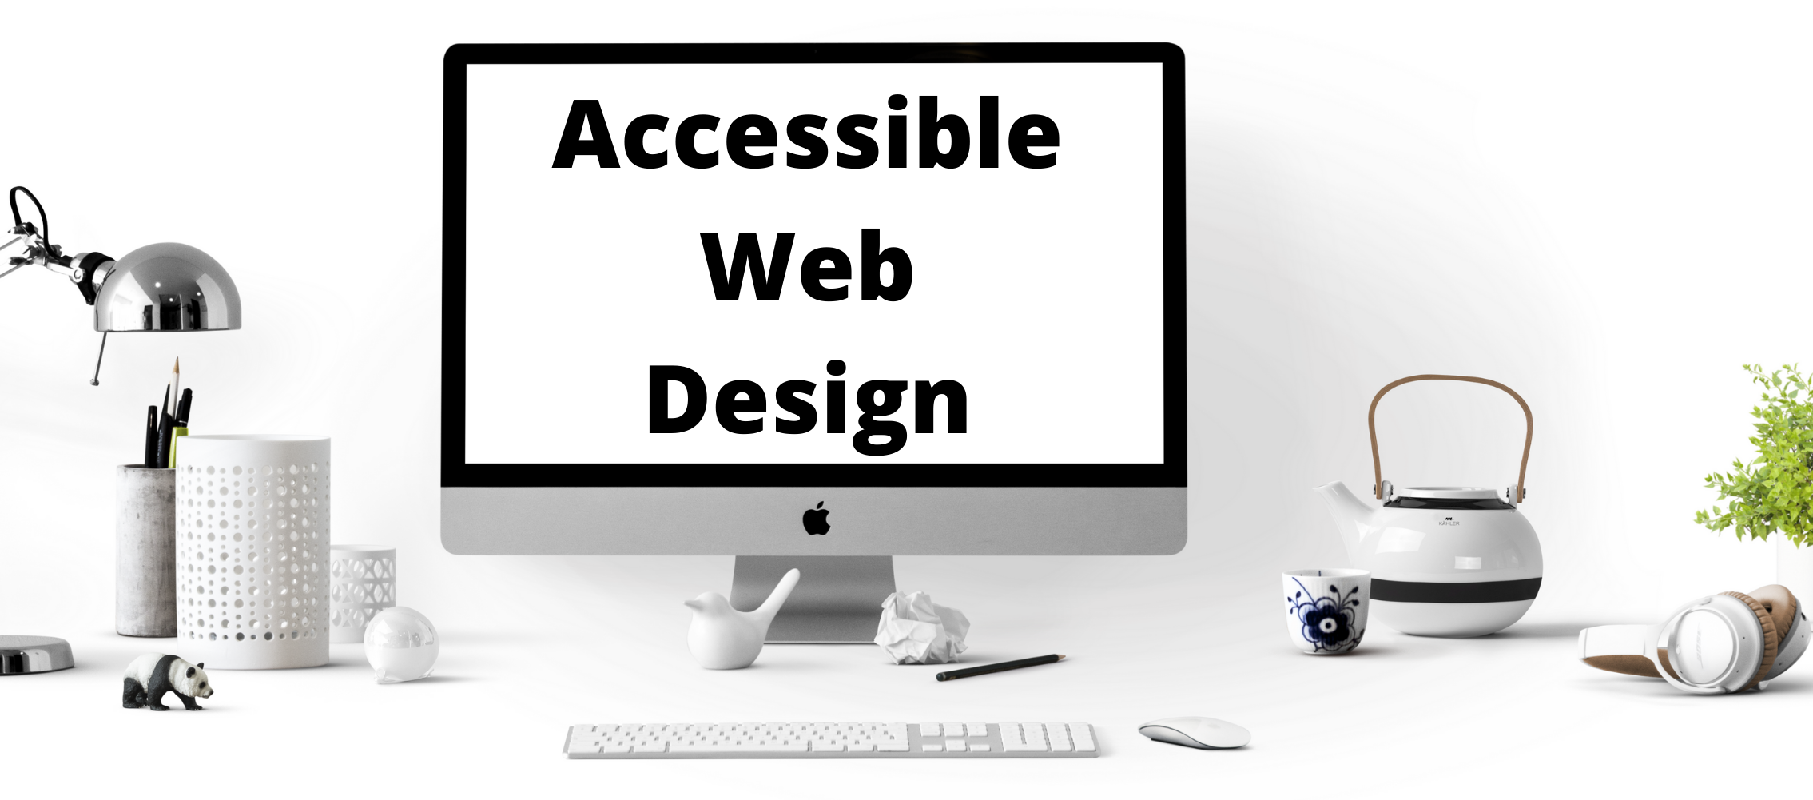 White desktop monitor with black text on the screen that says "Accessible Wed Design"